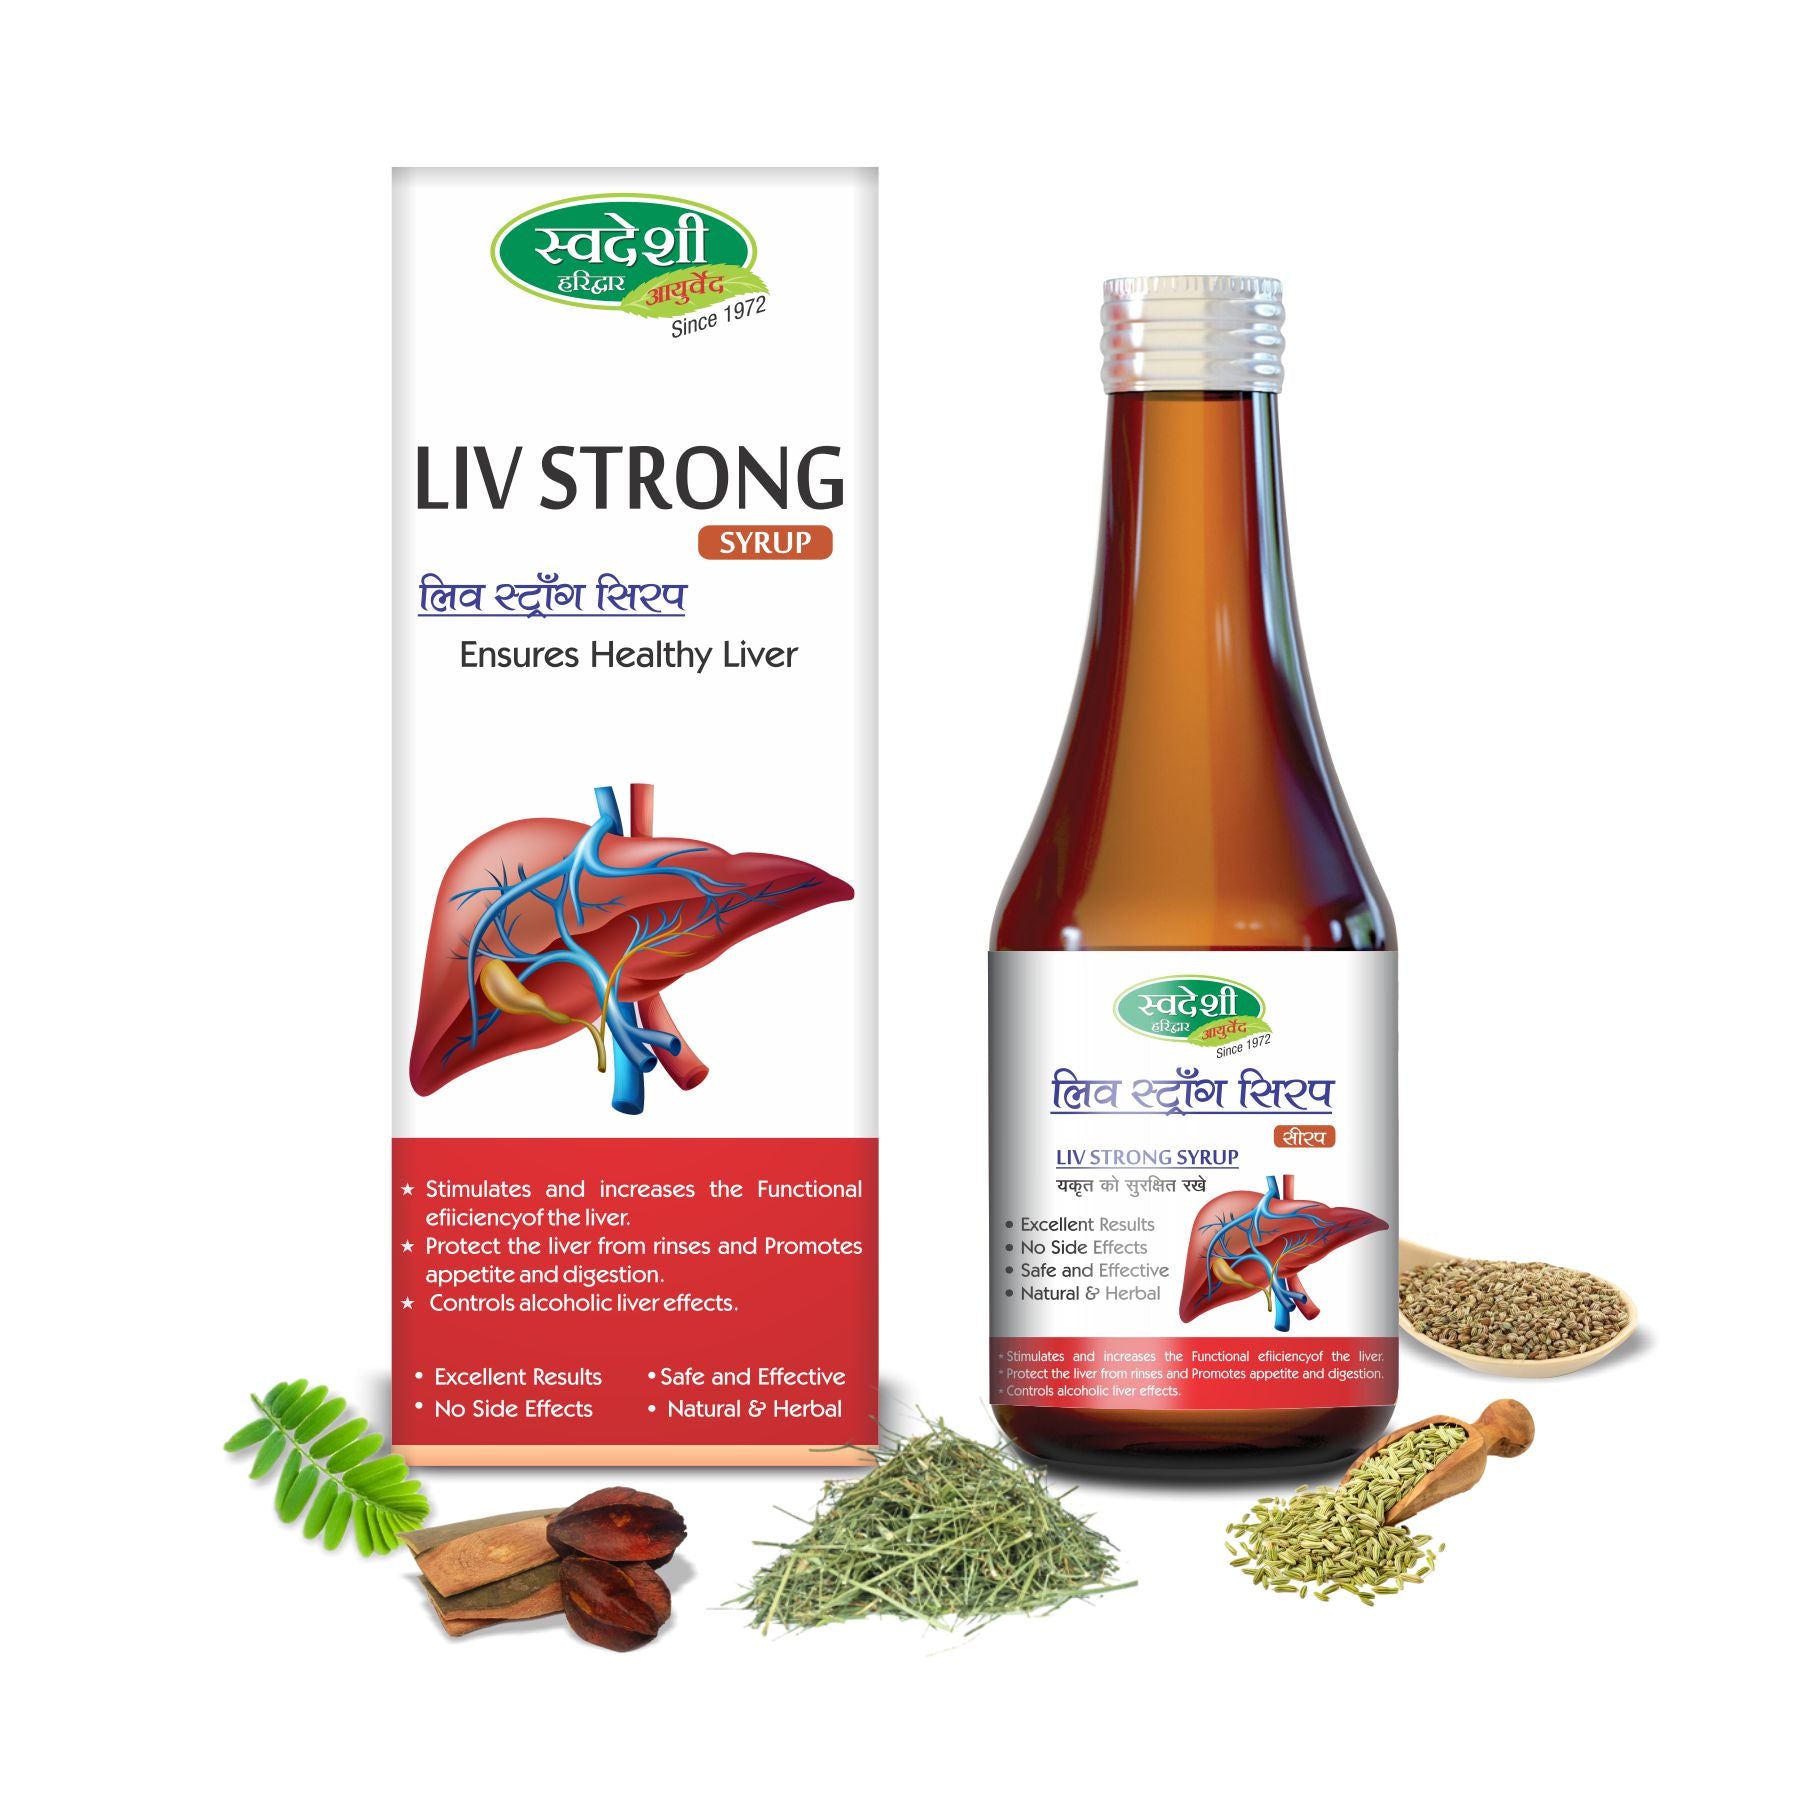 Liv strong Syrup